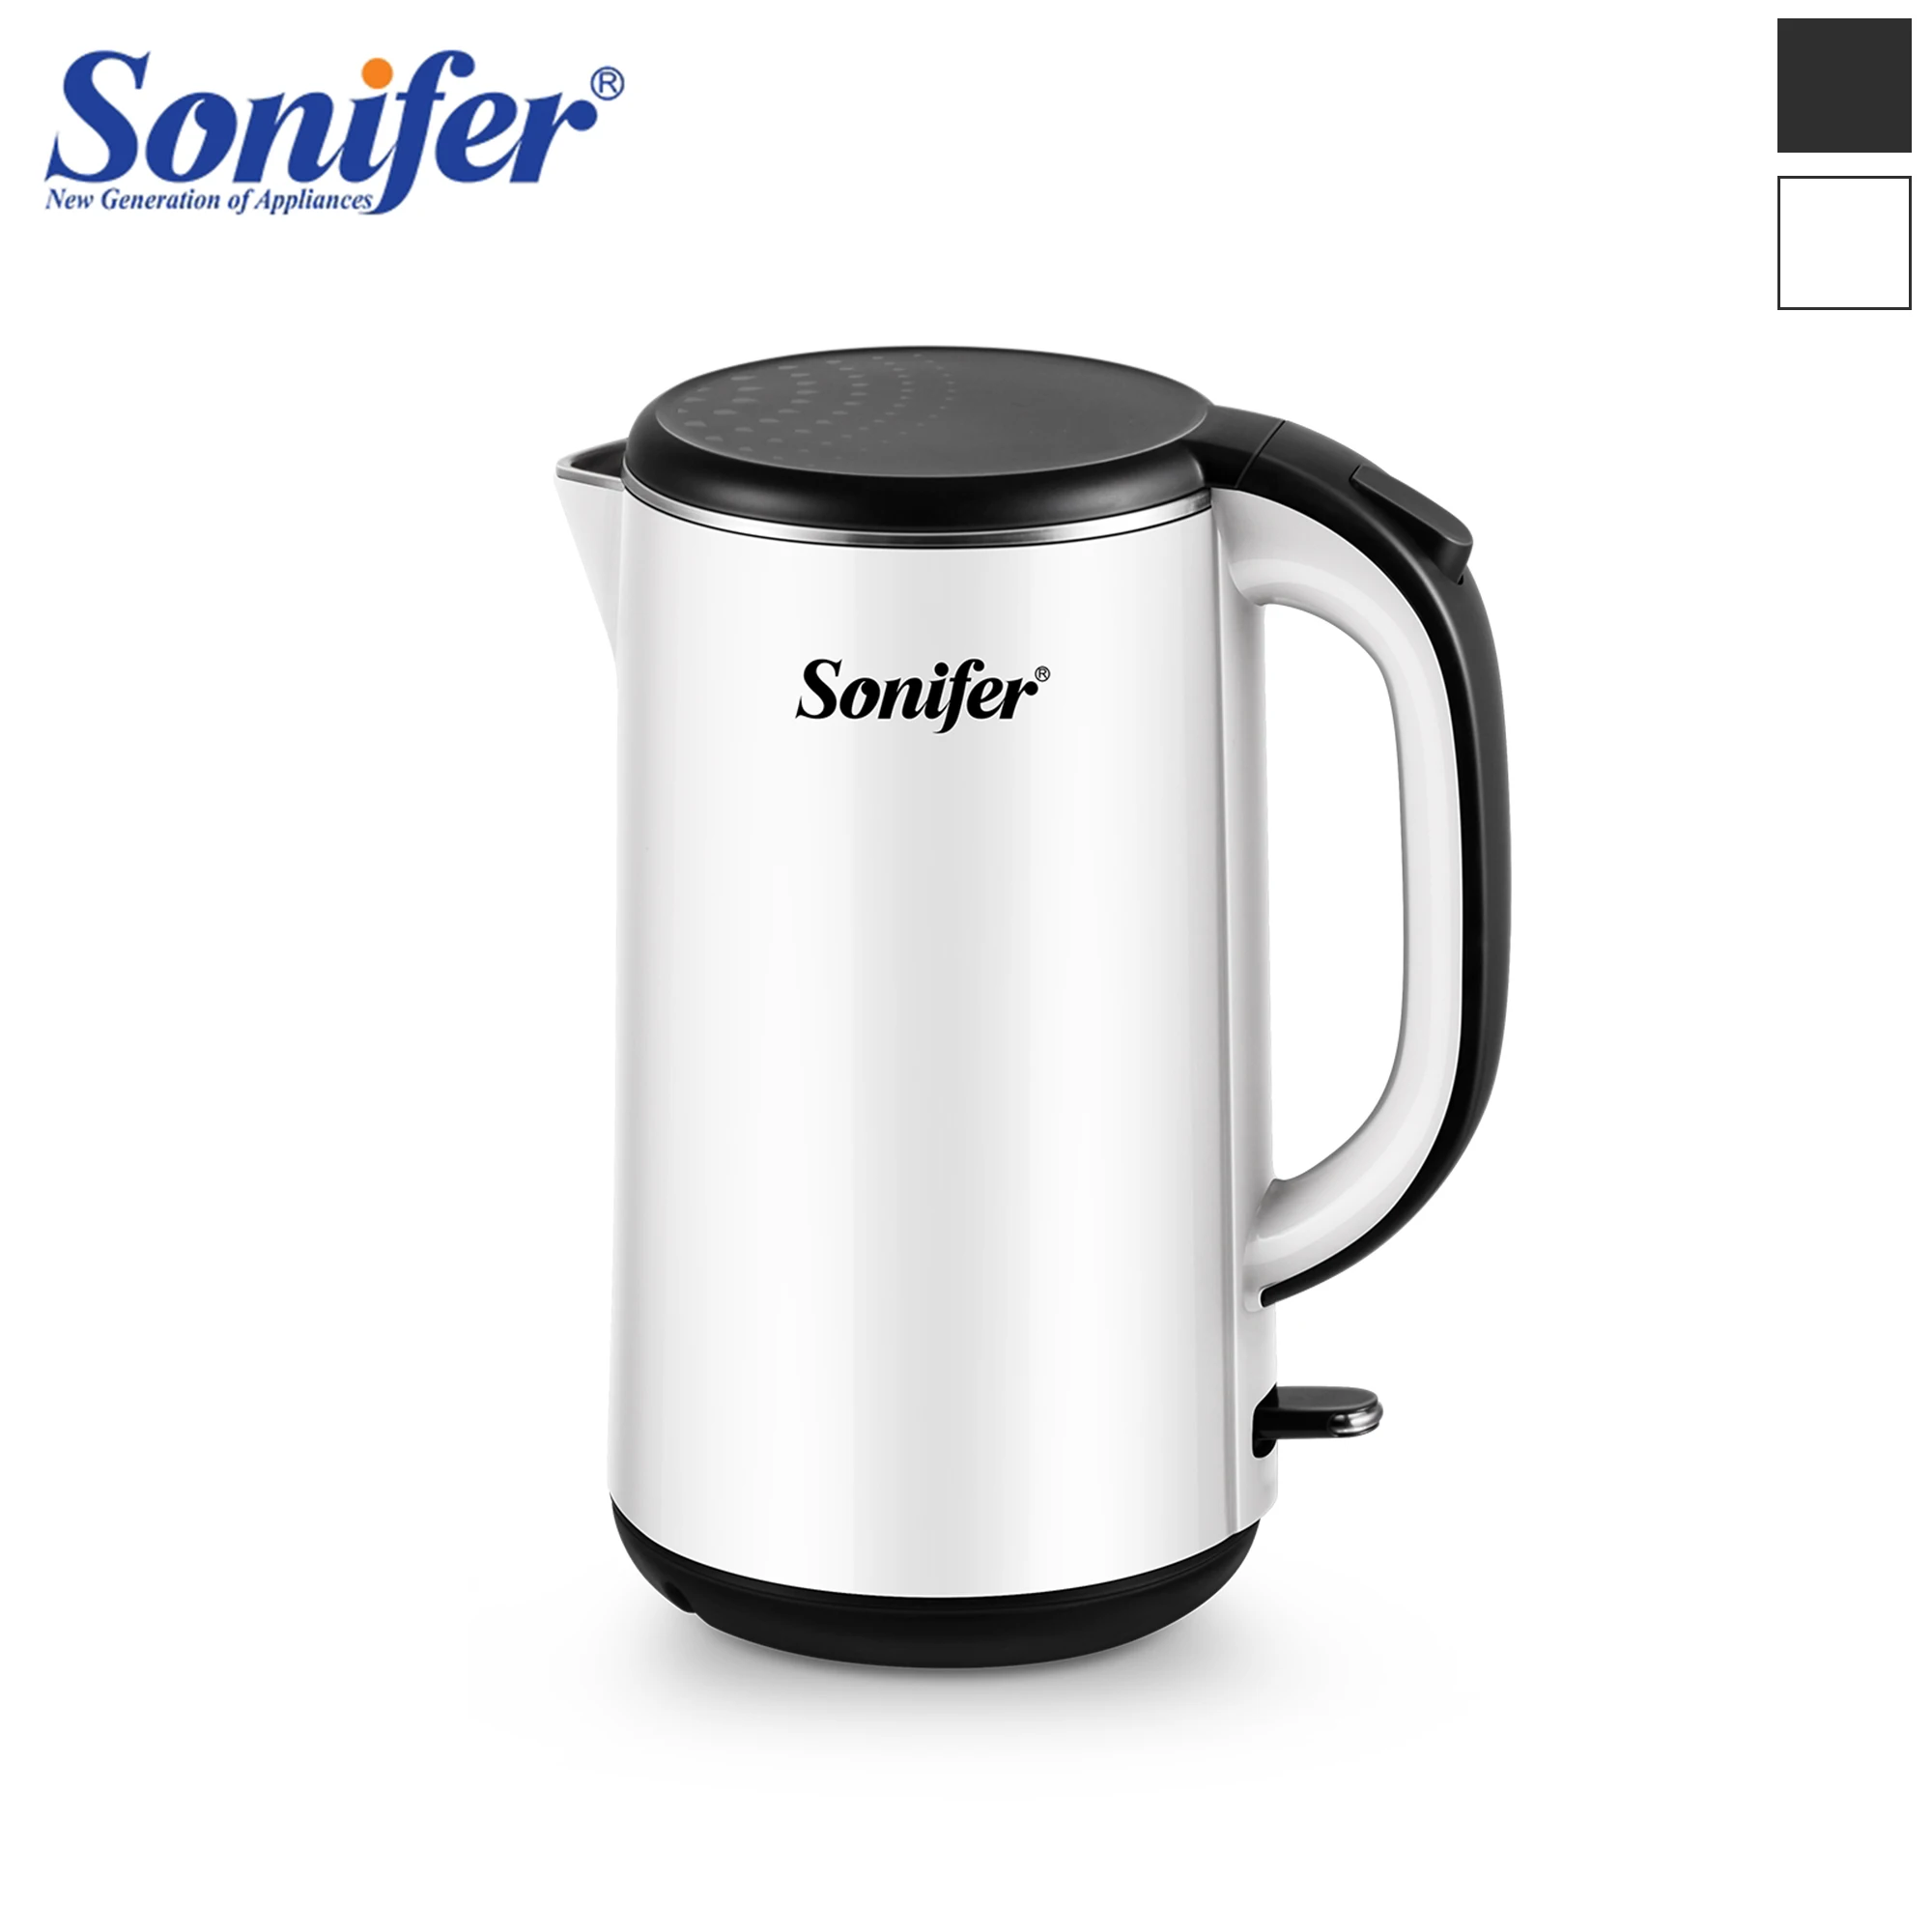 

1.8L Electric Kettle Stainless Steel 1500W Household Kitchen Appliances Fast Heating Boiling TeaPot Pot 220V Sonifer